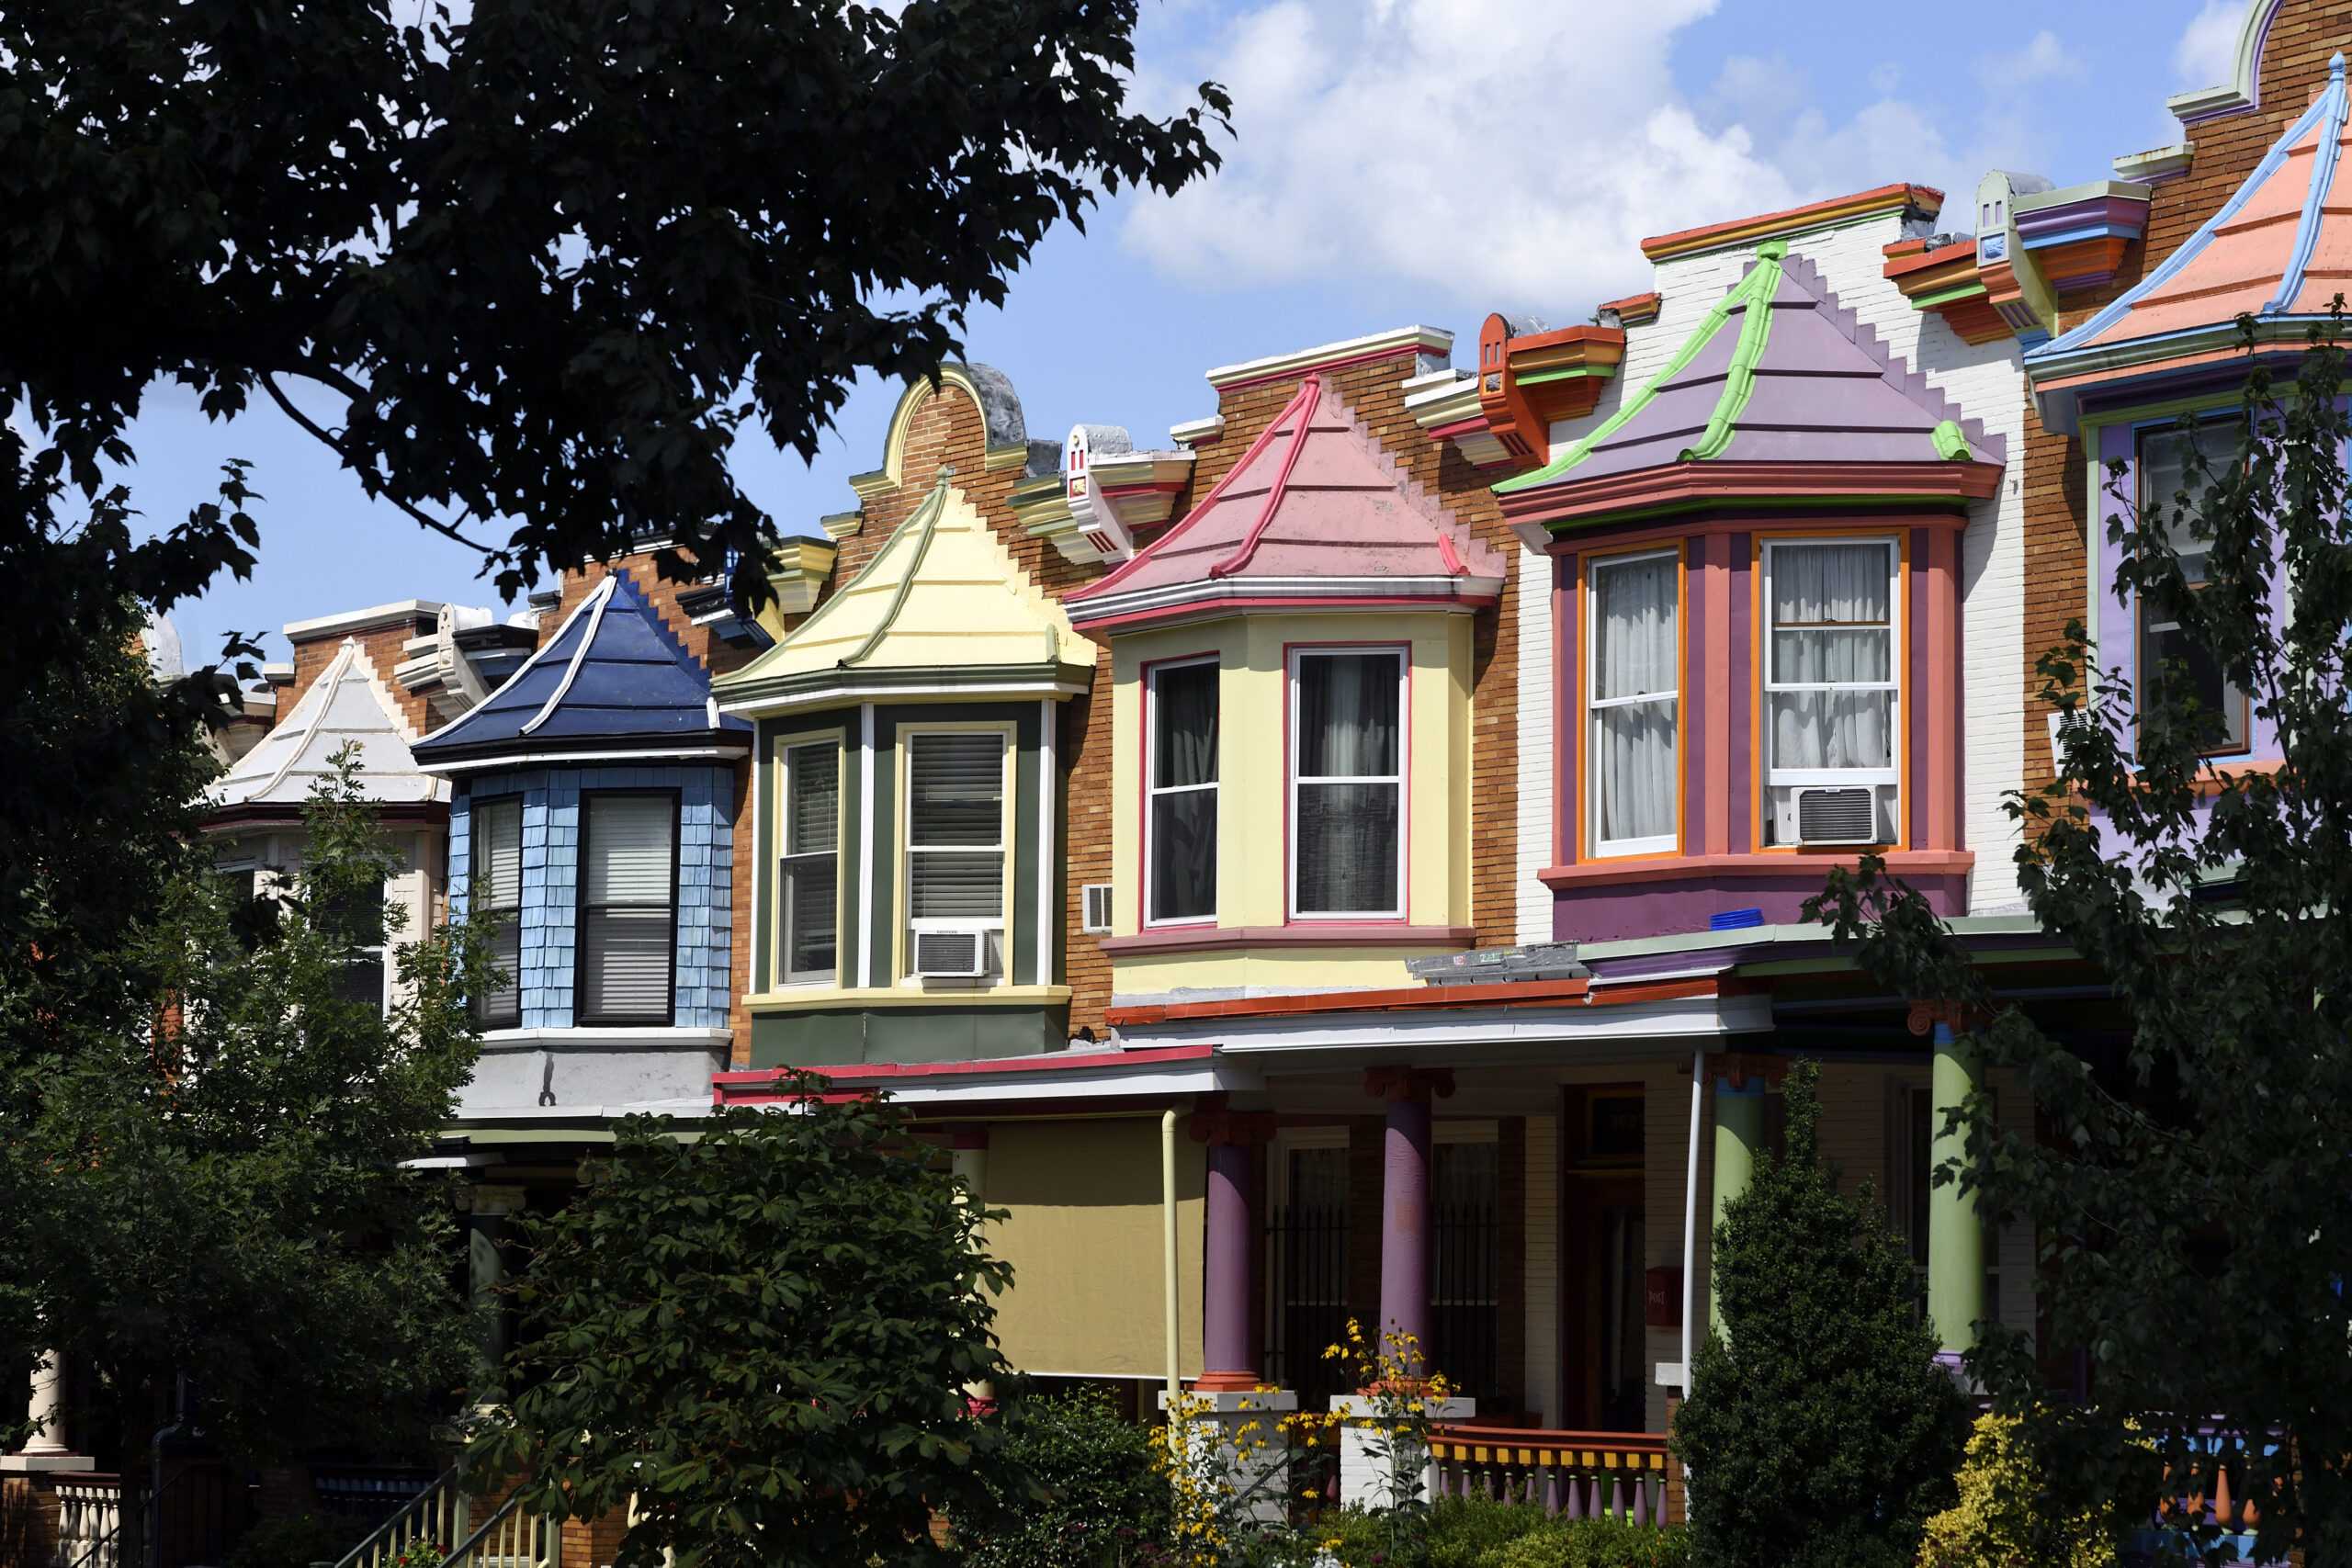 Rowhouses painted different colors in Baltimore's Charles Village neighborhood